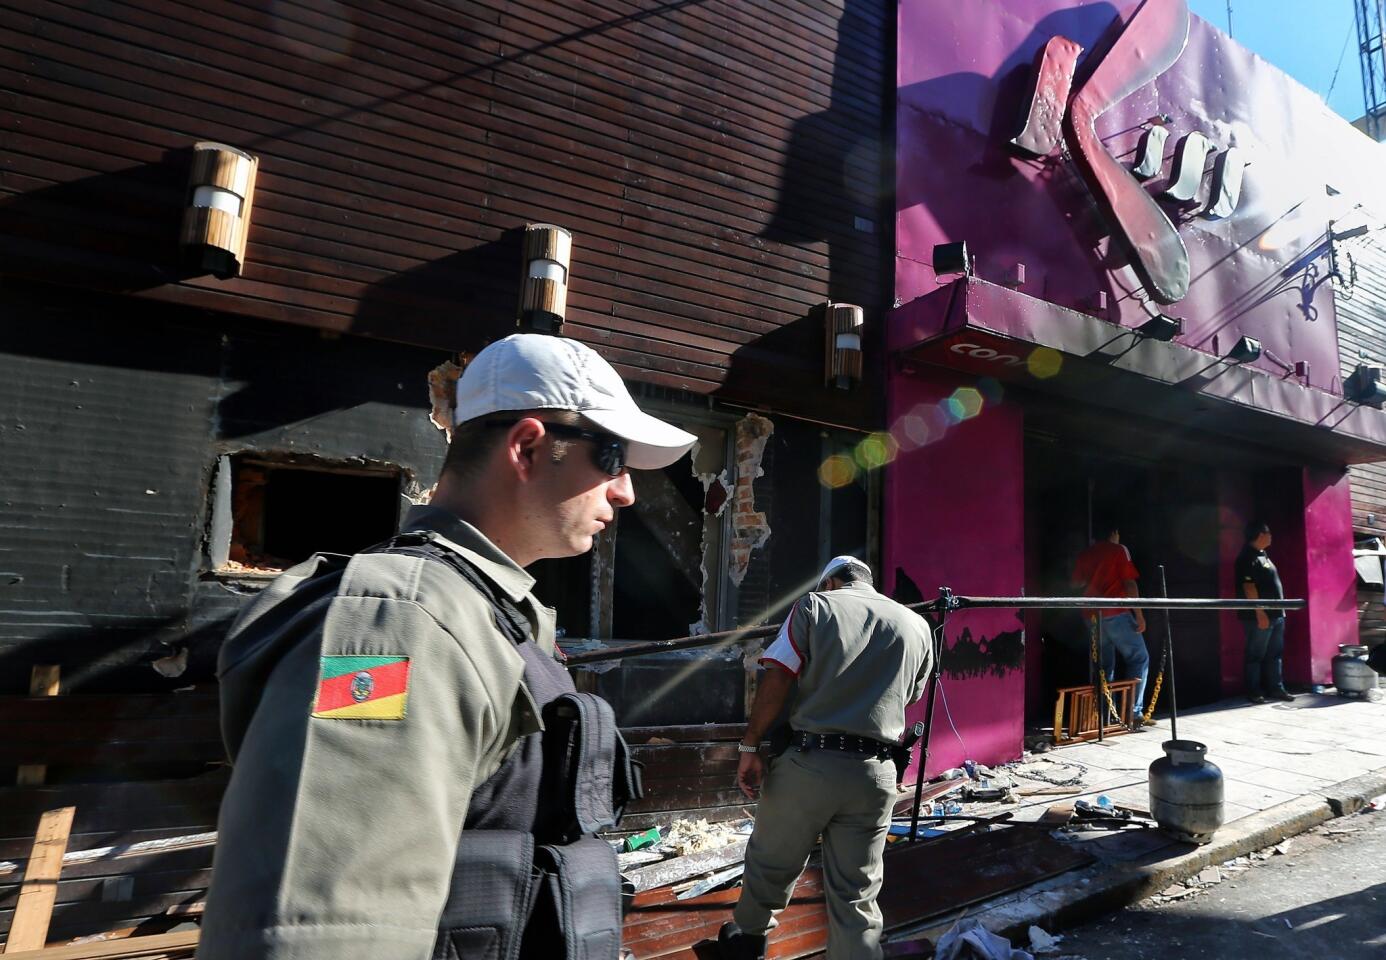 Policemen check the Kiss nightclub in Santa Maria, Brazil, where a blaze killed 235 people. Police have arrested four suspects -- two of the club's owners and two members of a band that staged a pyrotechnics show -- but some Brazilians say city officials are also culpable for allowing safety rules to be ignored.